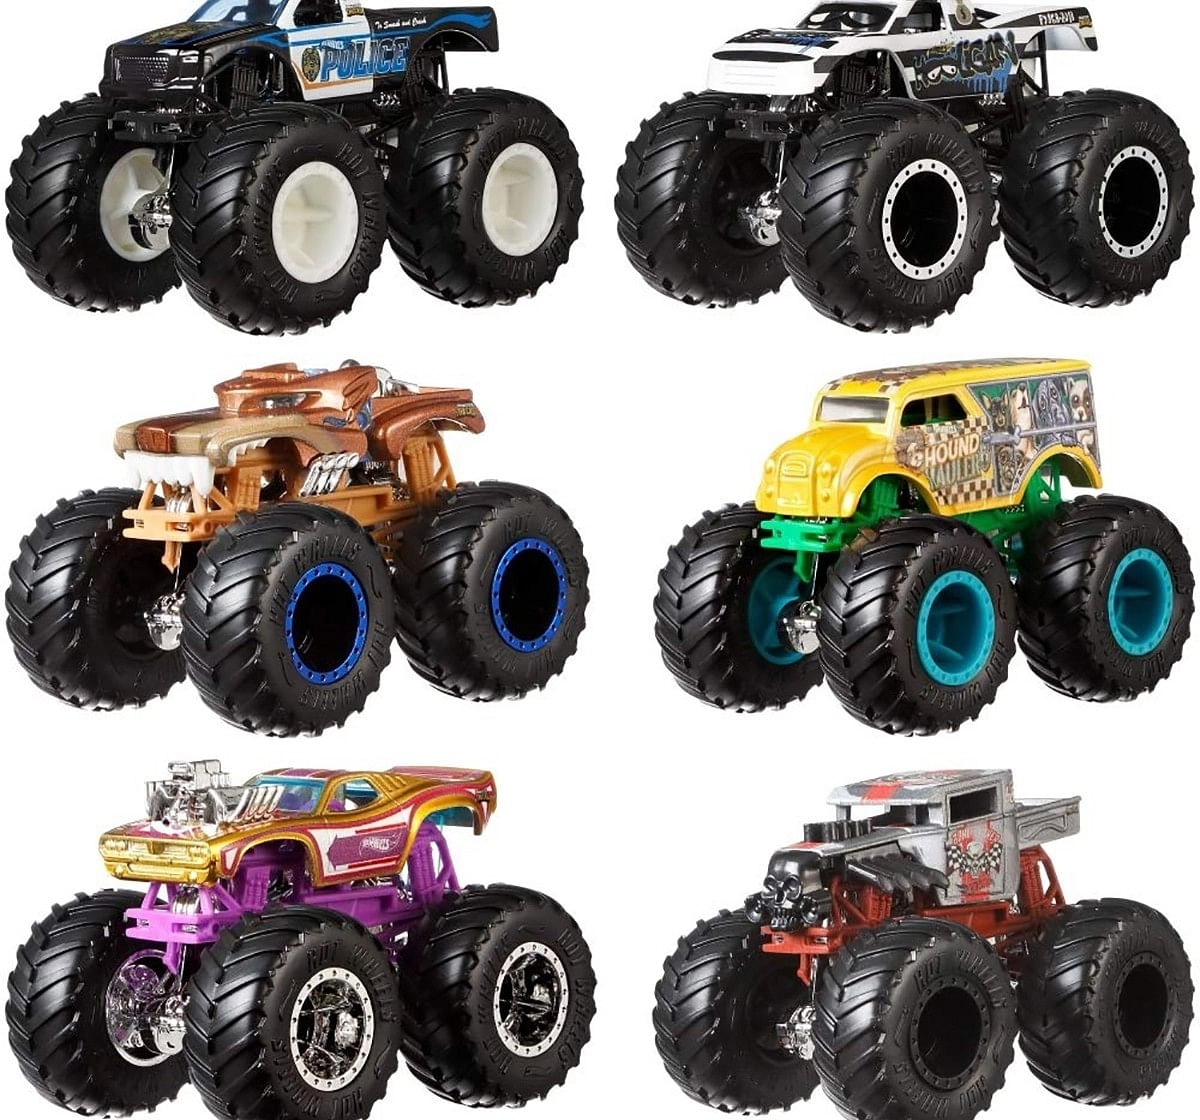 Hot Wheels 1:64 Monster Trucks Demolition Doubles Pack of 2 Vehicles for Kids age 3Y+ 